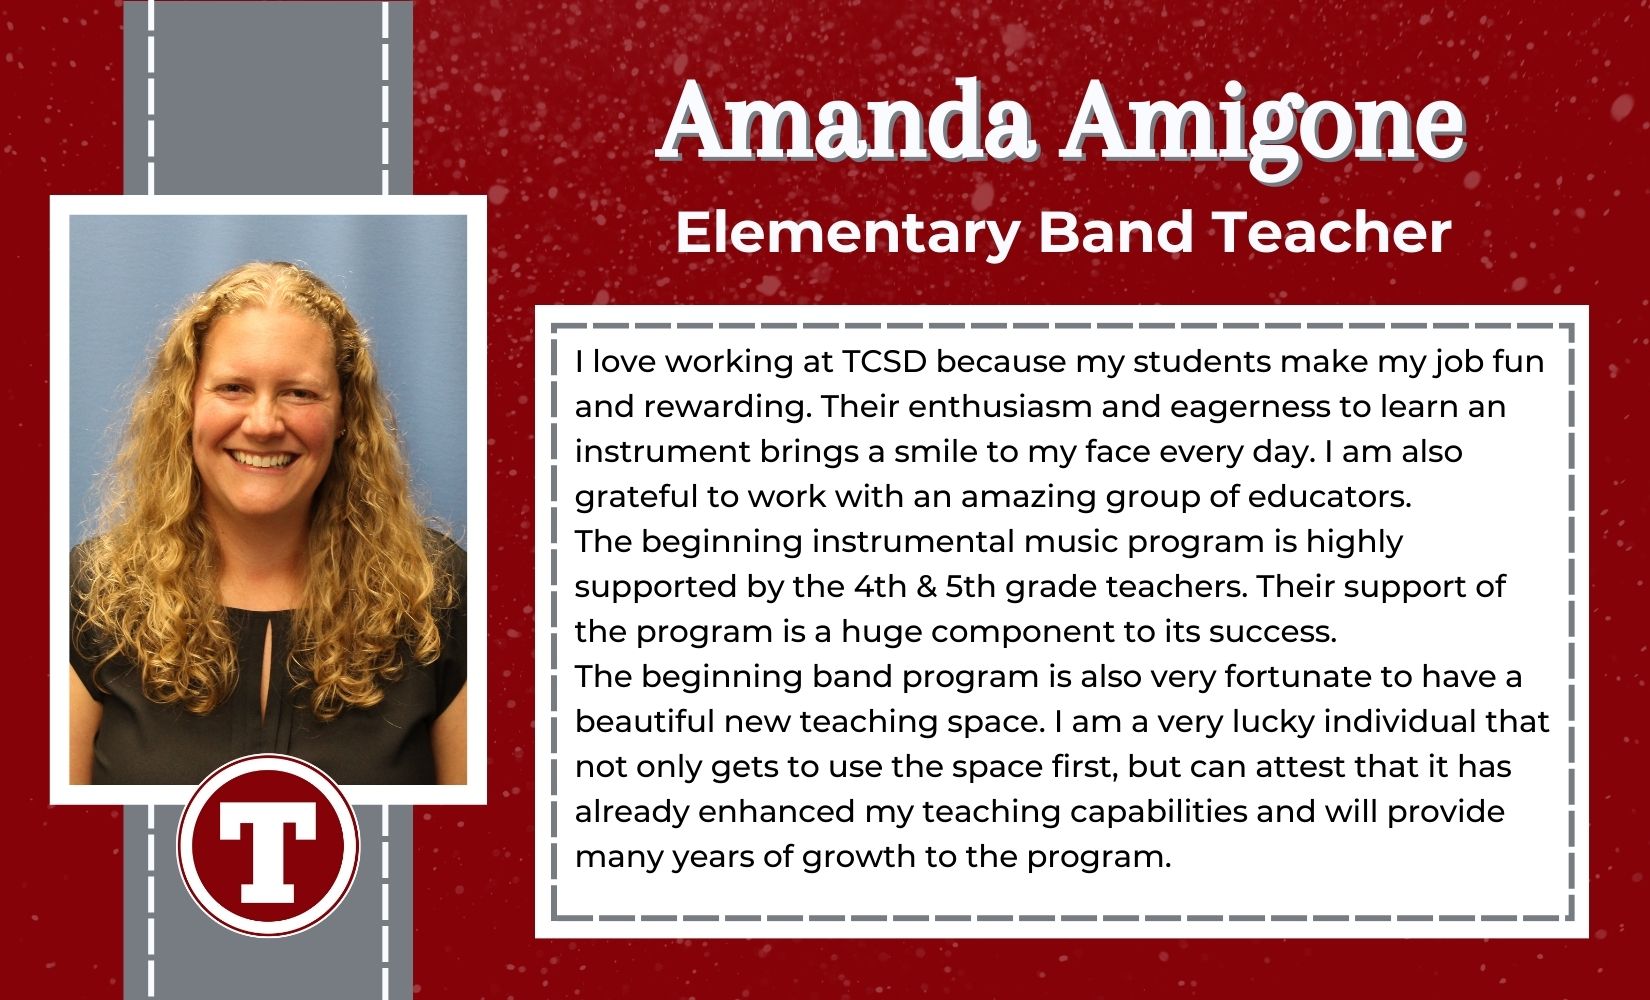 Amanda Amigone, Elementary Band Teacher,I love working at TCSD because my students make my job fun and rewarding. Their enthusiasm and eagerness to learn an instrument brings a smile to my face every day. I am also grateful to work with an amazing group of educators.  The beginning instrumental music program is highly supported by the 4th & 5th grade teachers. Their support of the program is a huge component to its success.  The beginning band program is also very fortunate to have a beautiful new teaching space. I am a very lucky individual that not only gets to use the space first, but can attest that it has already enhanced my teaching capabilities and will provide many years of growth to the program.